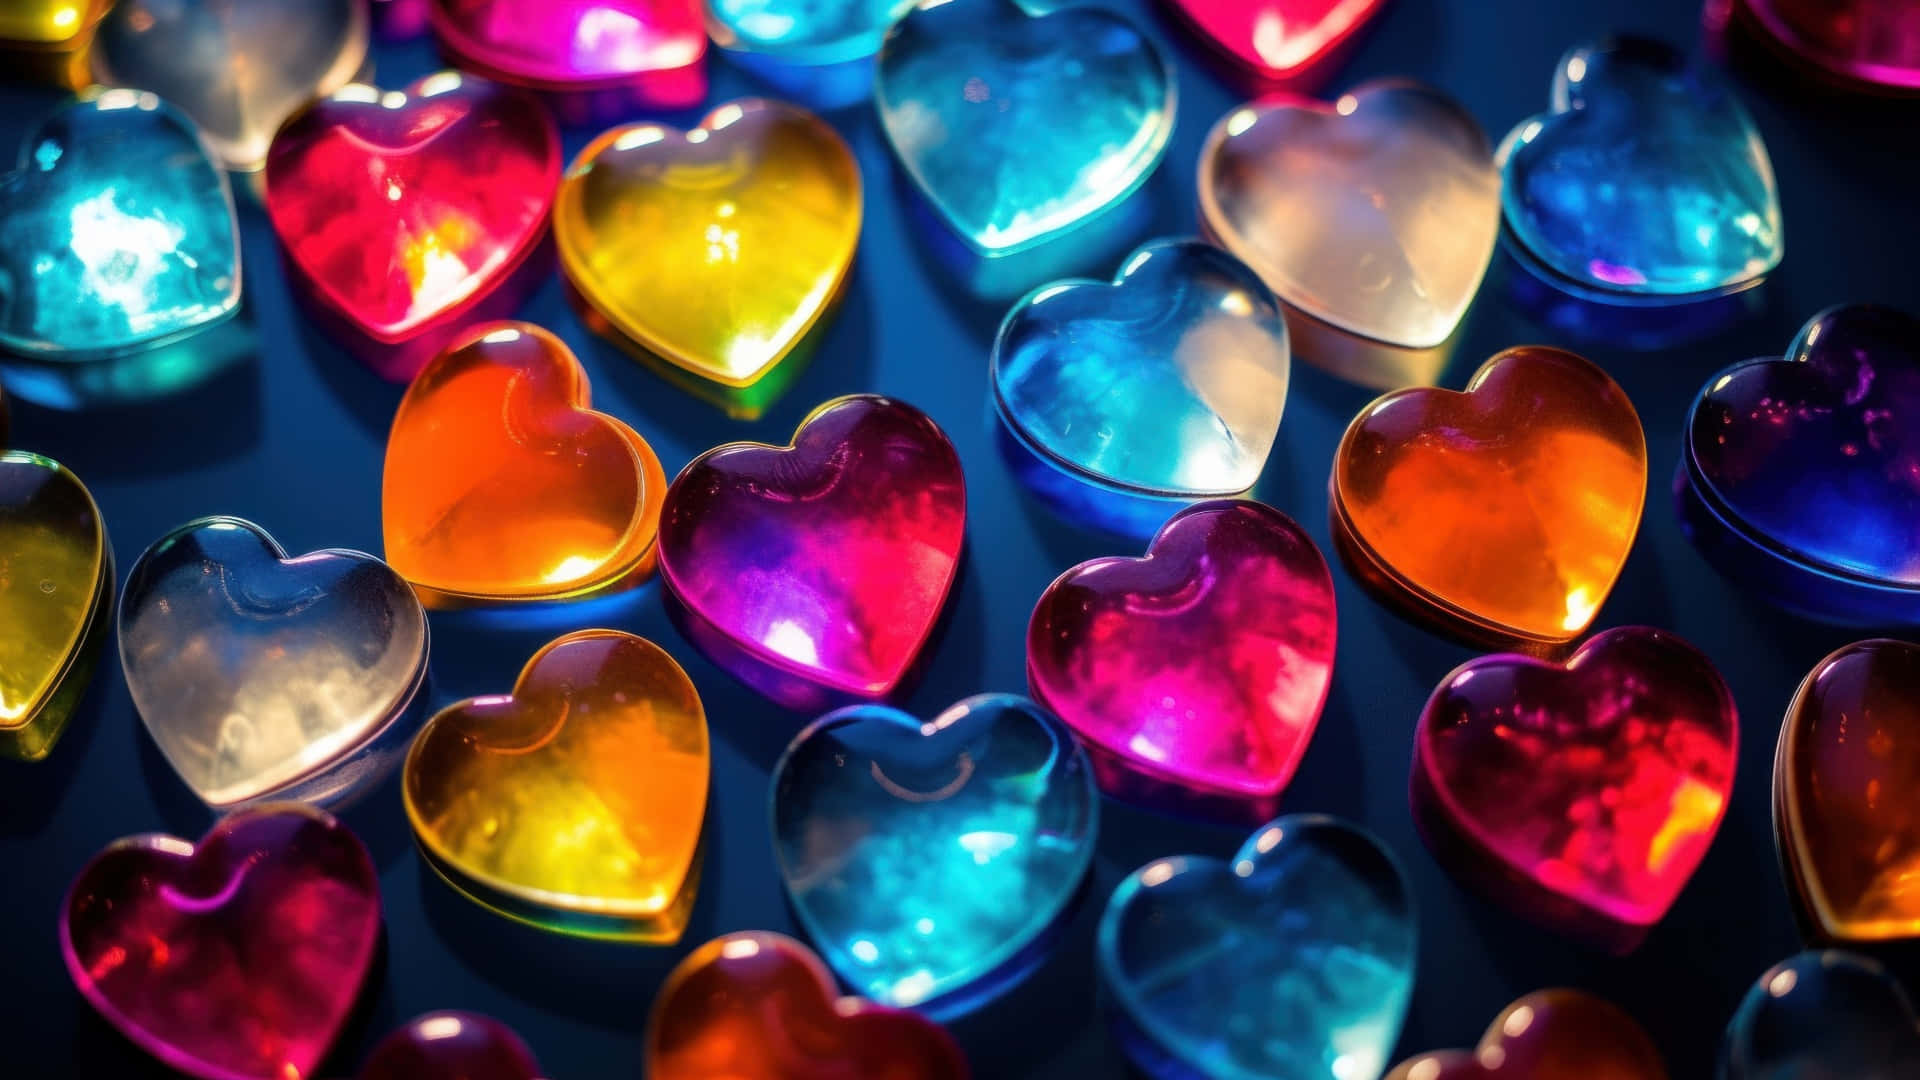 Colorful Heart Shaped Glass Pieces Wallpaper